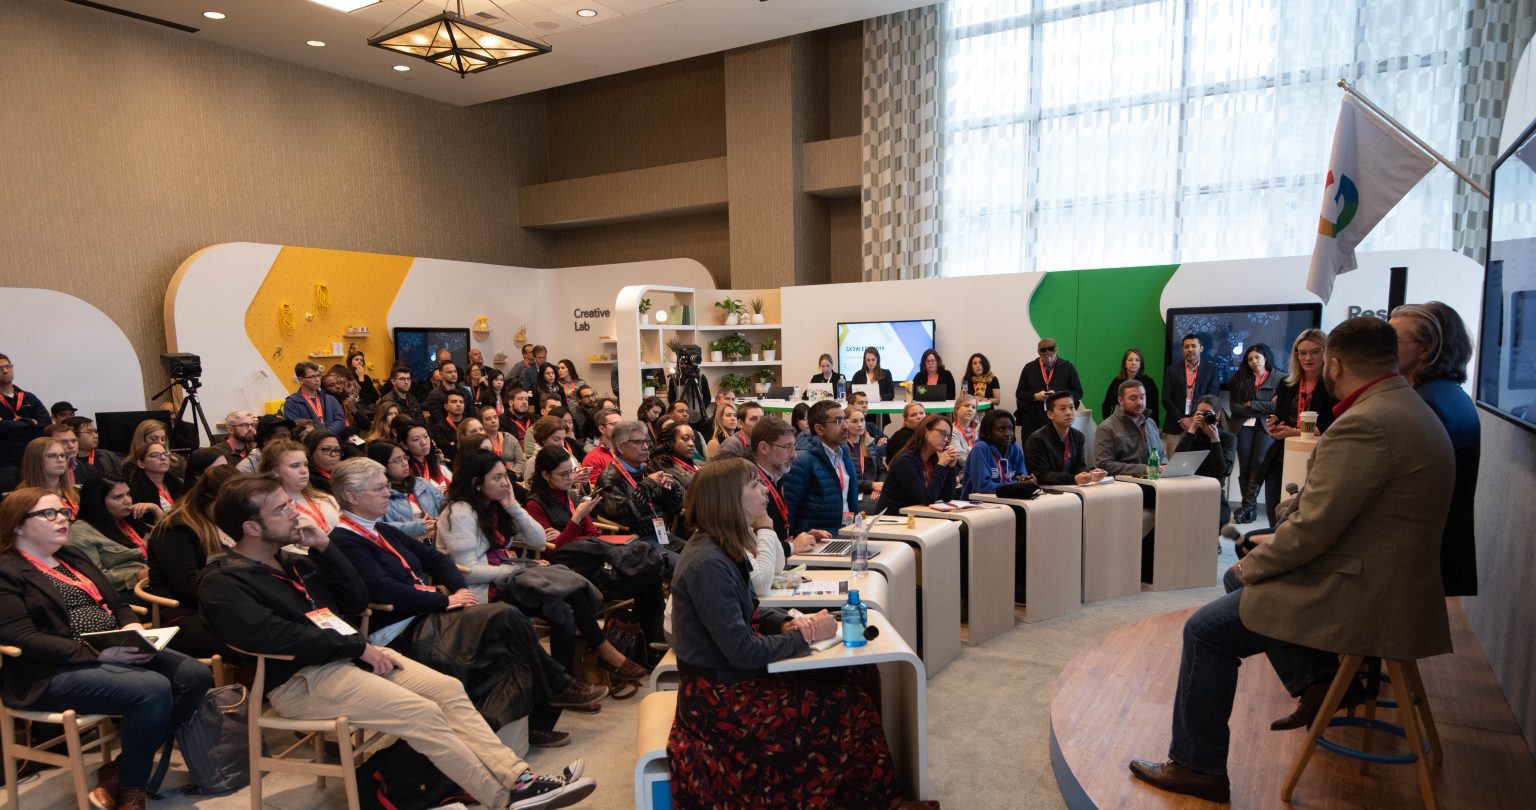 The Google Lab at SXSW EDU 2019. Photo by Christopher Bouie.